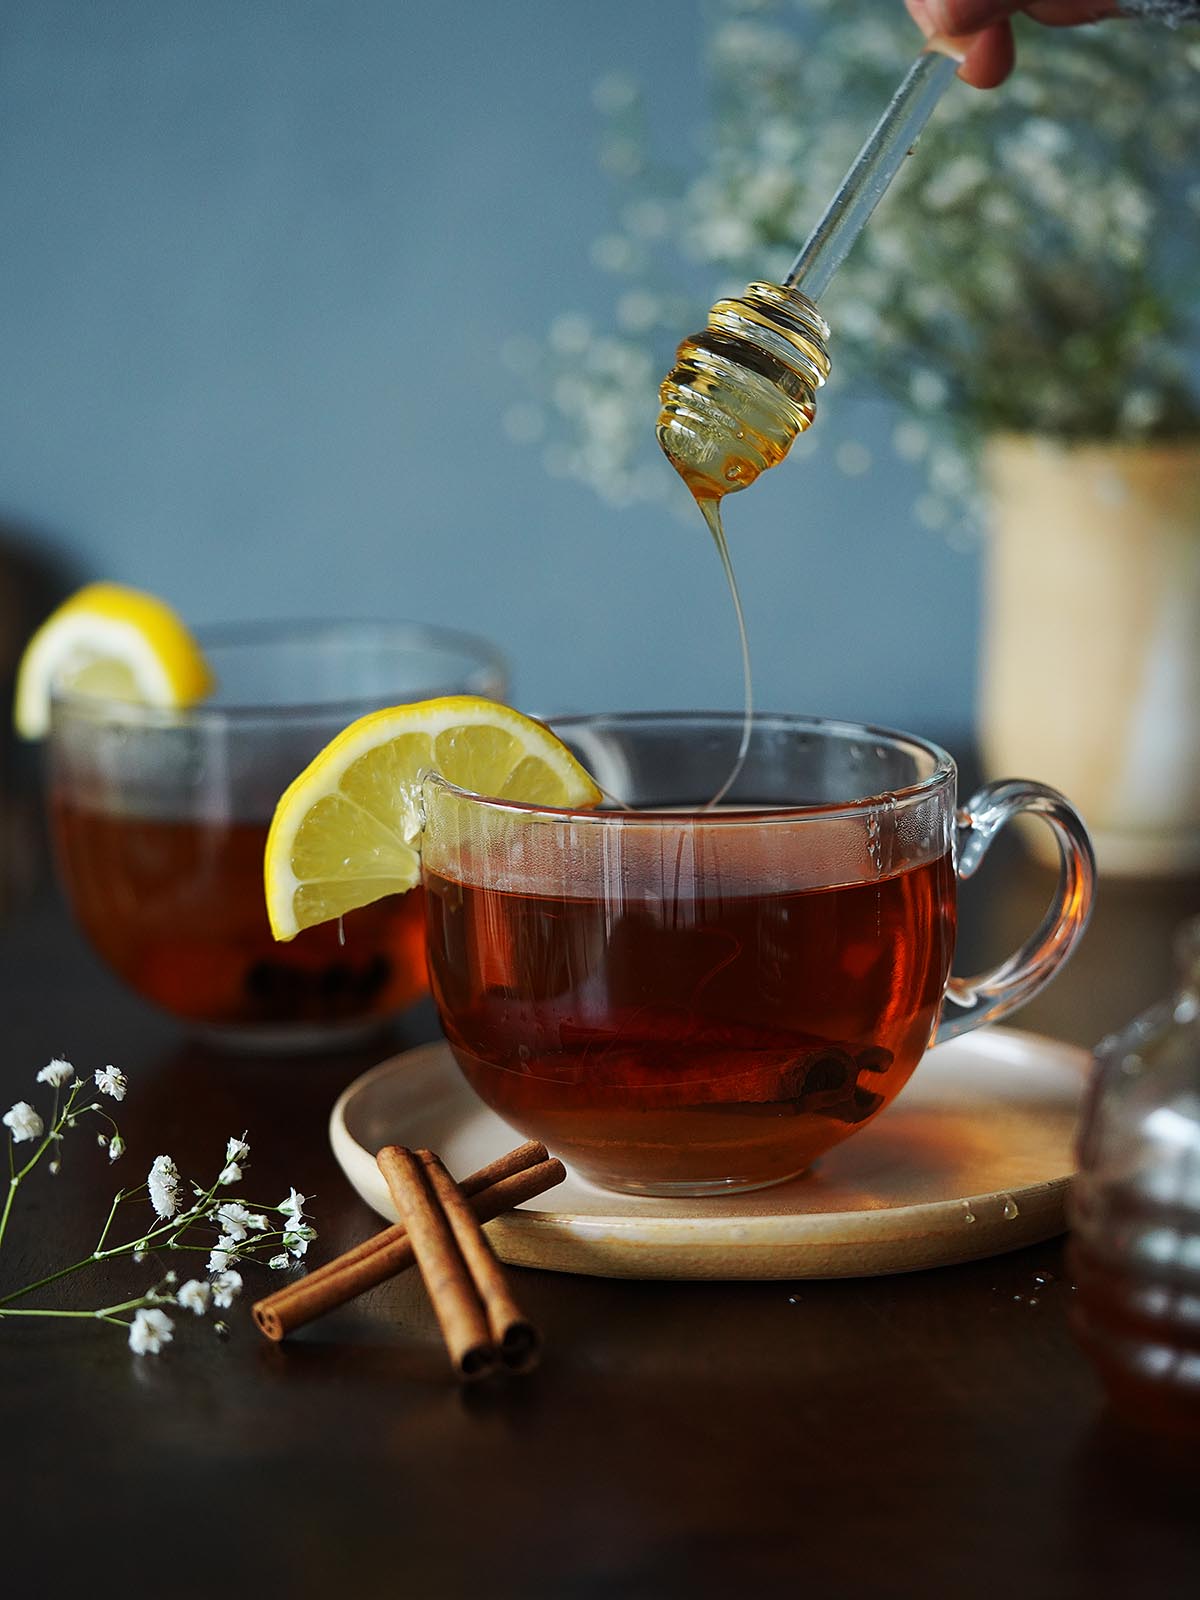 Drizzling the tea in a mug with honey.